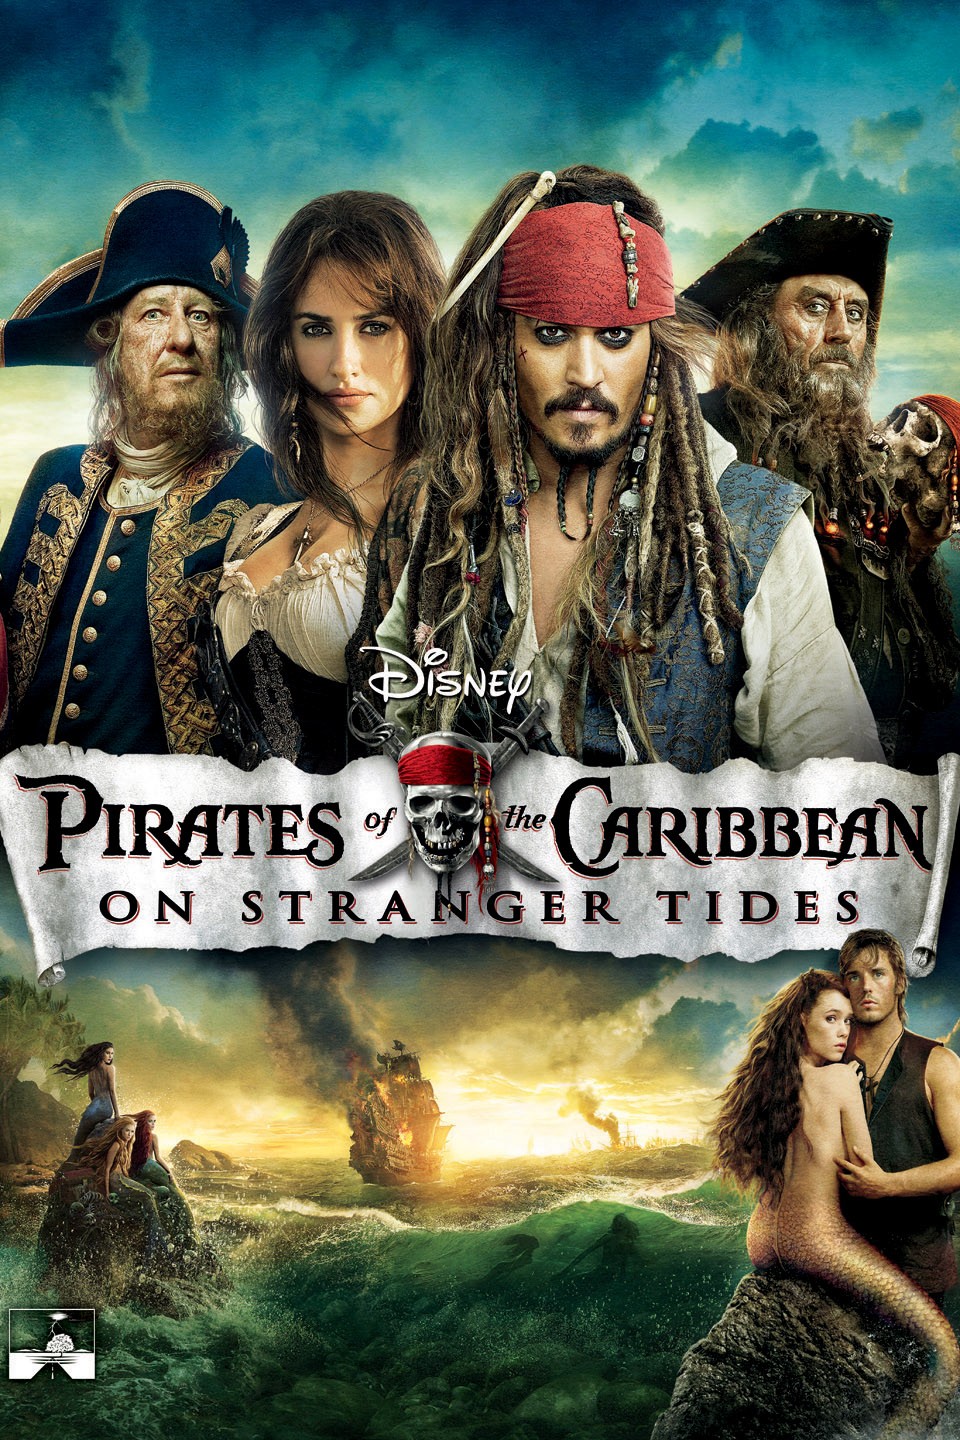 The Pirate Movie' is so bad it's kind of good